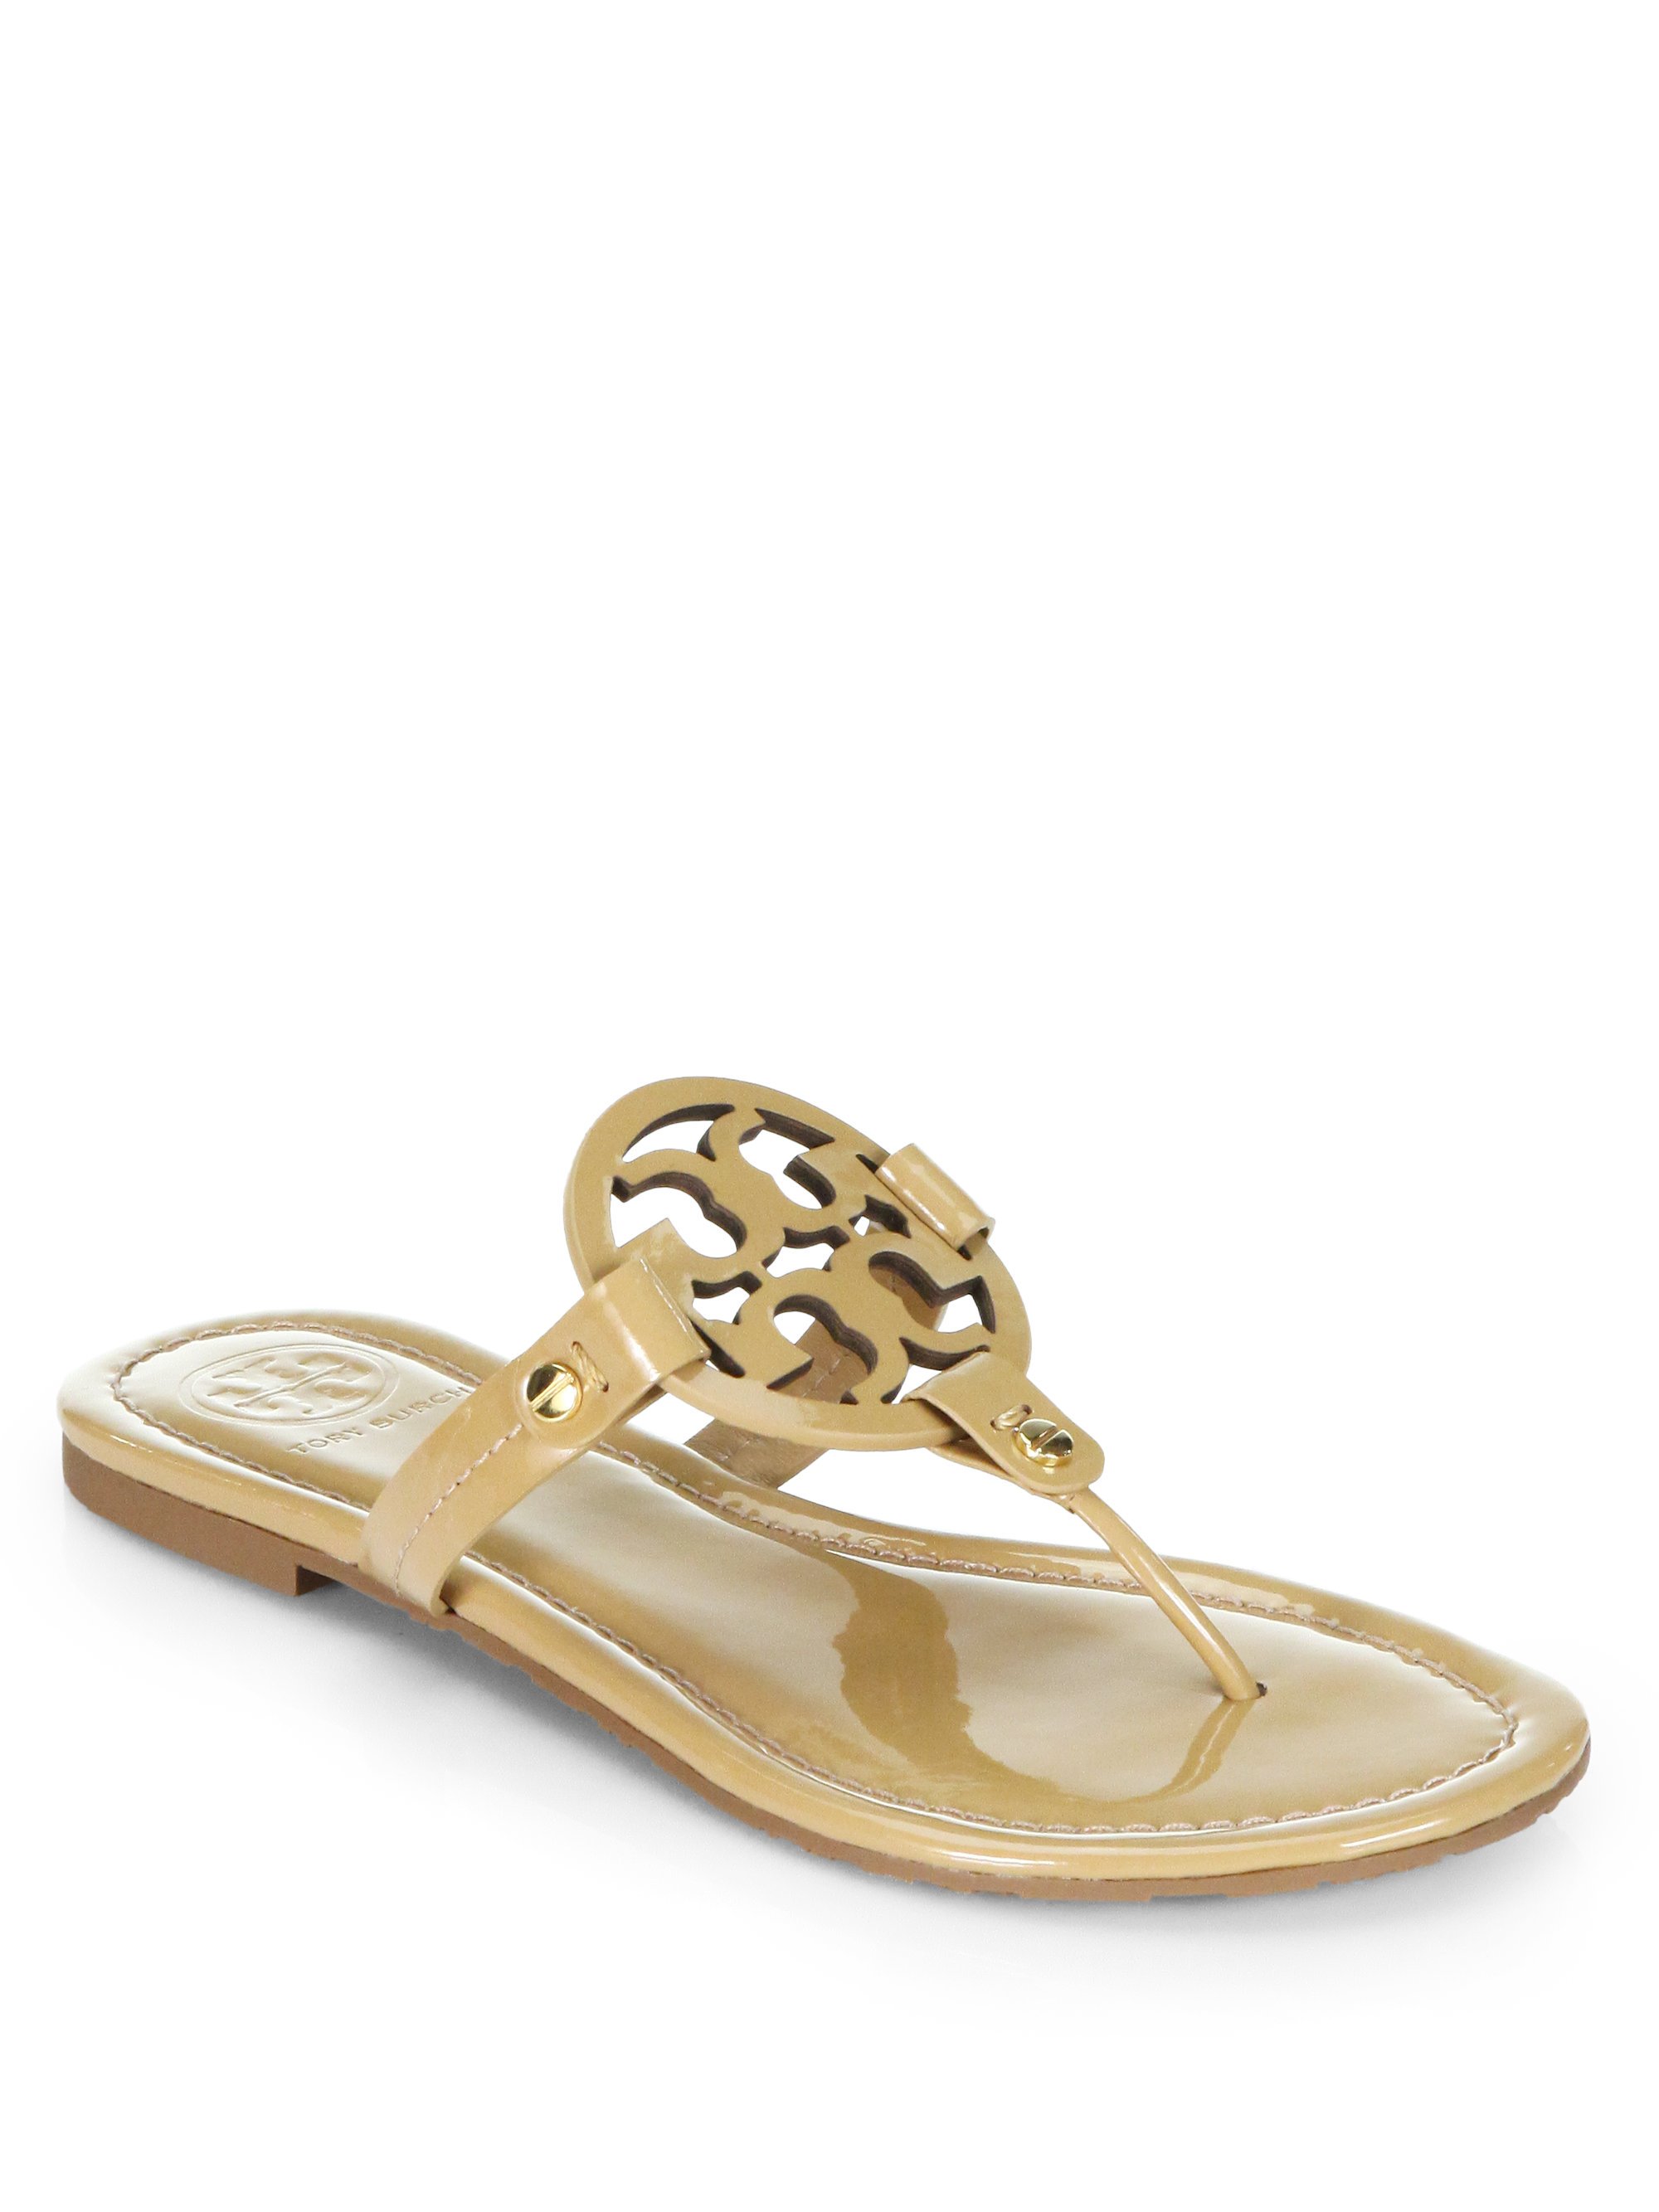 Tory Burch Miller Patent Leather Thong Sandals in Khaki (SAND) | Lyst